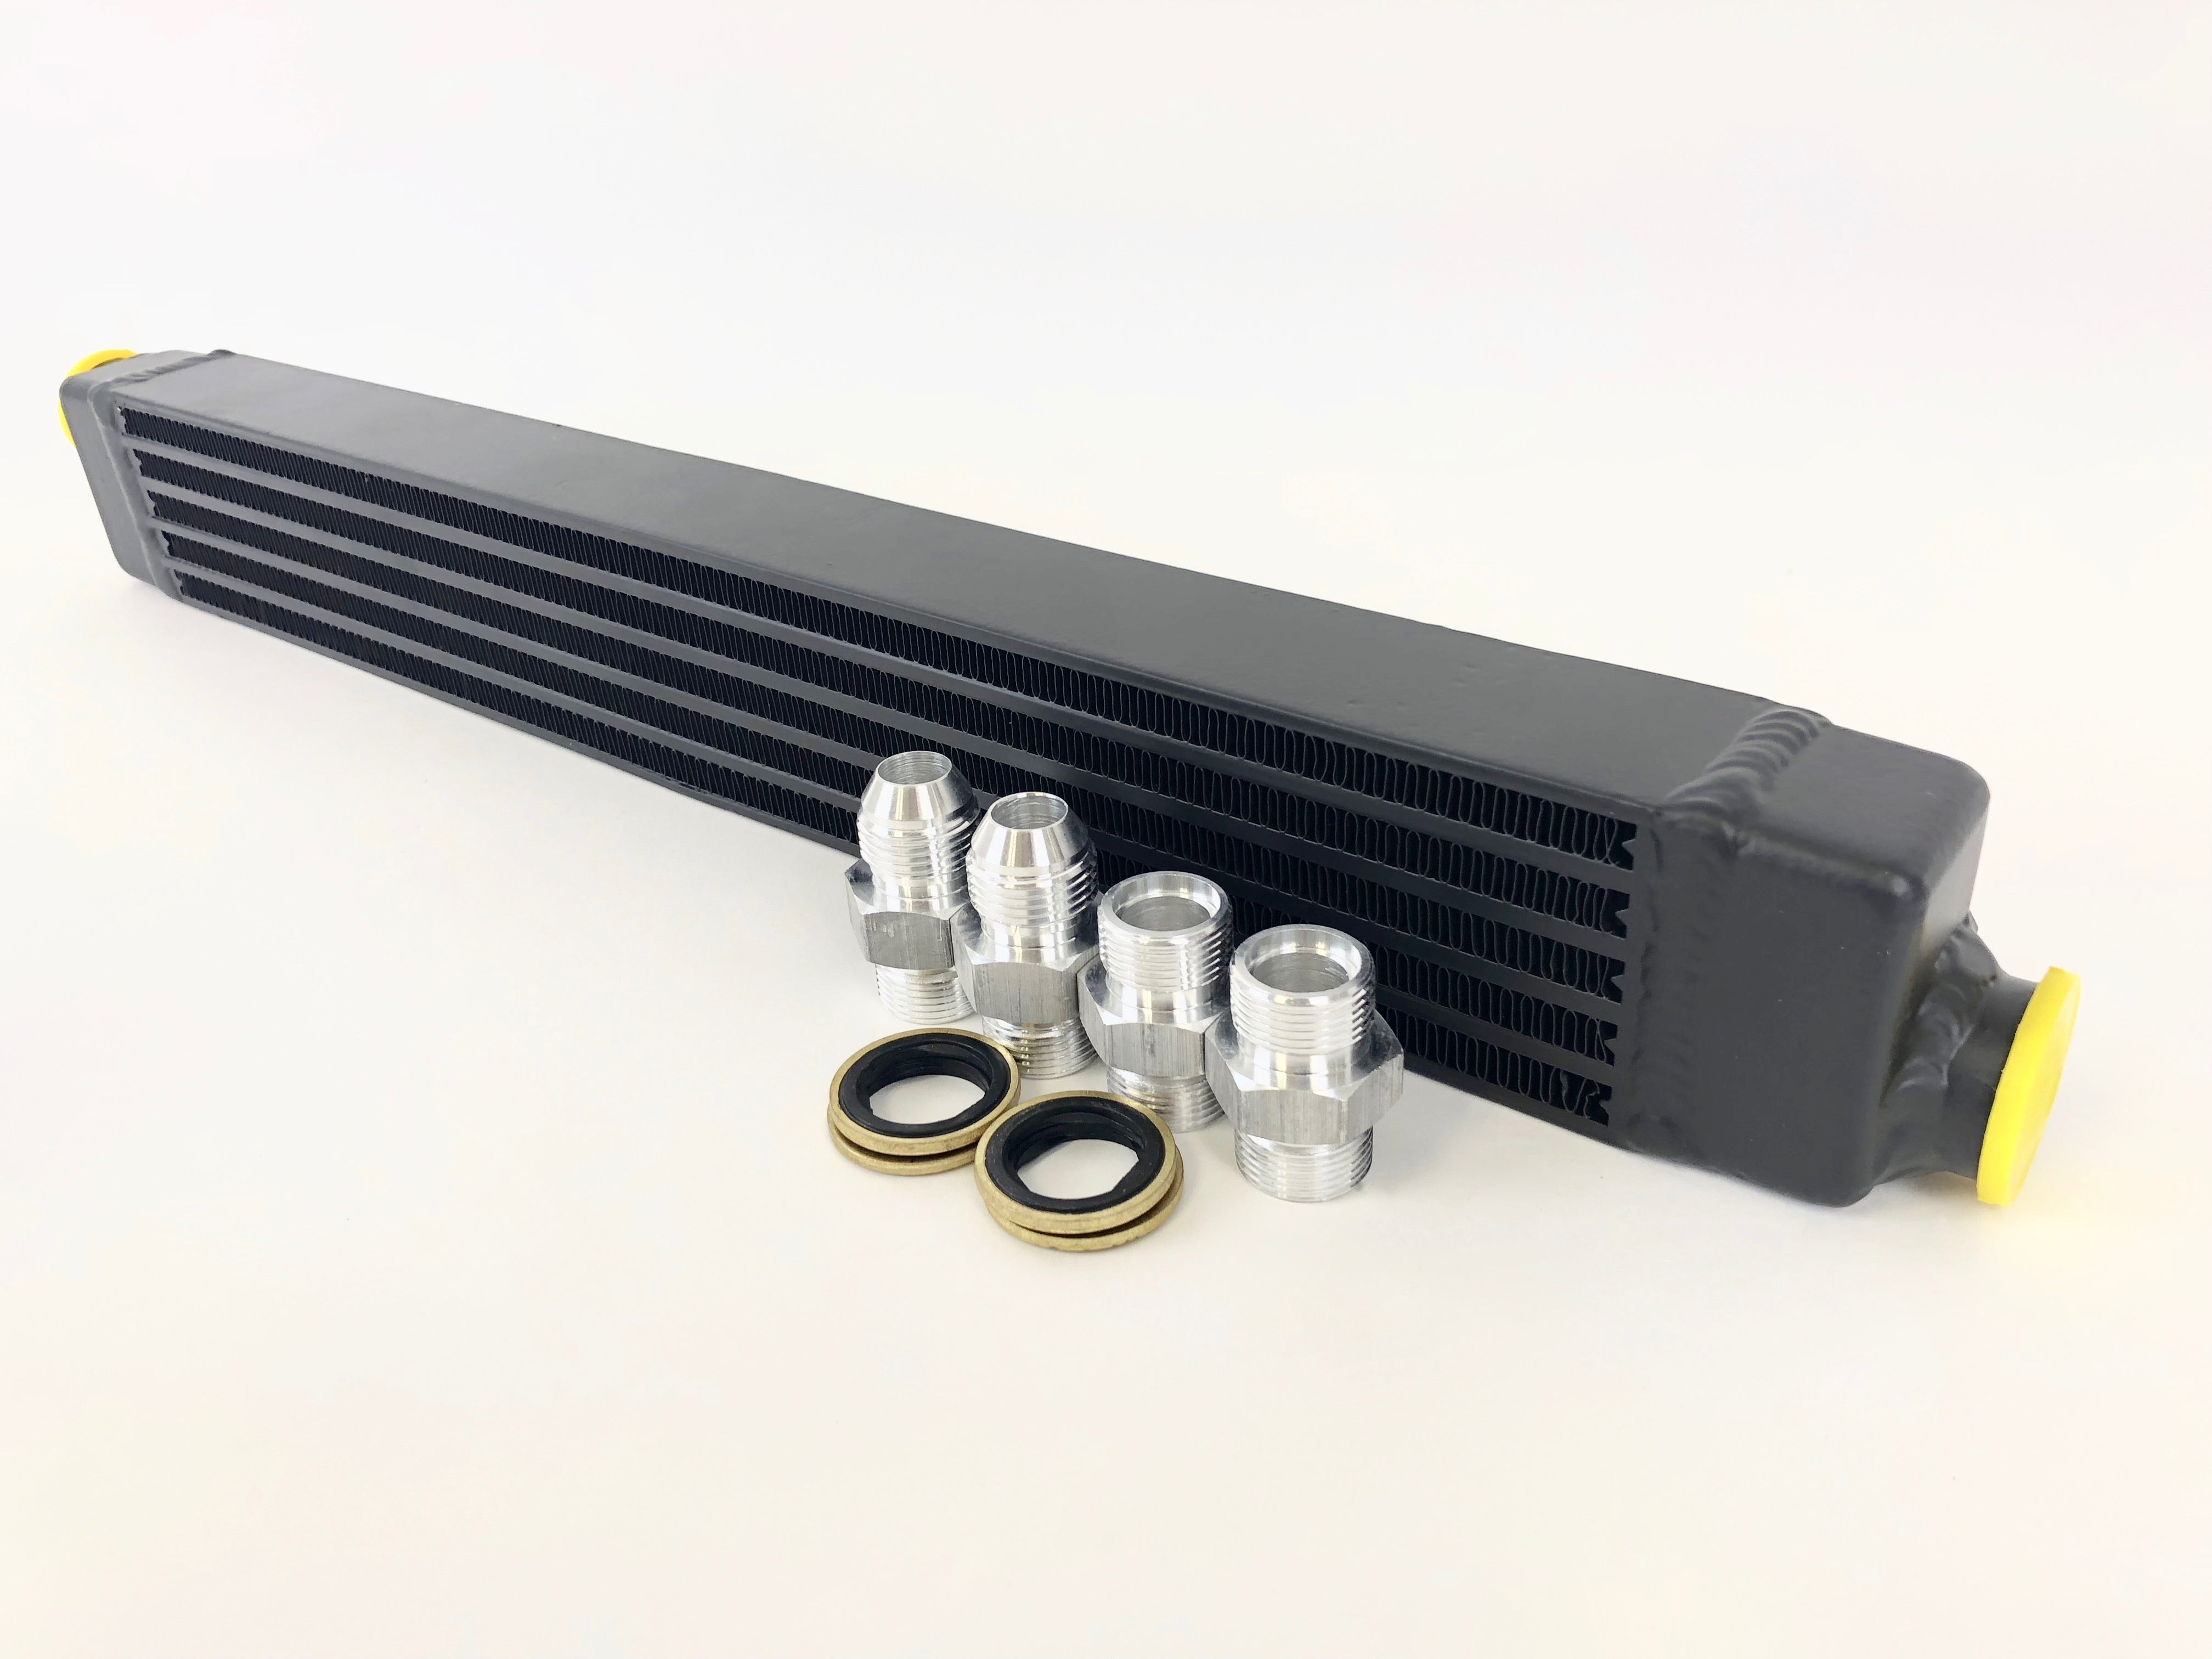 CSF 8092 BMW E30 high performance Oil Cooler w/adjustable fittings for OEM style and AN-10 male connections Photo-1 